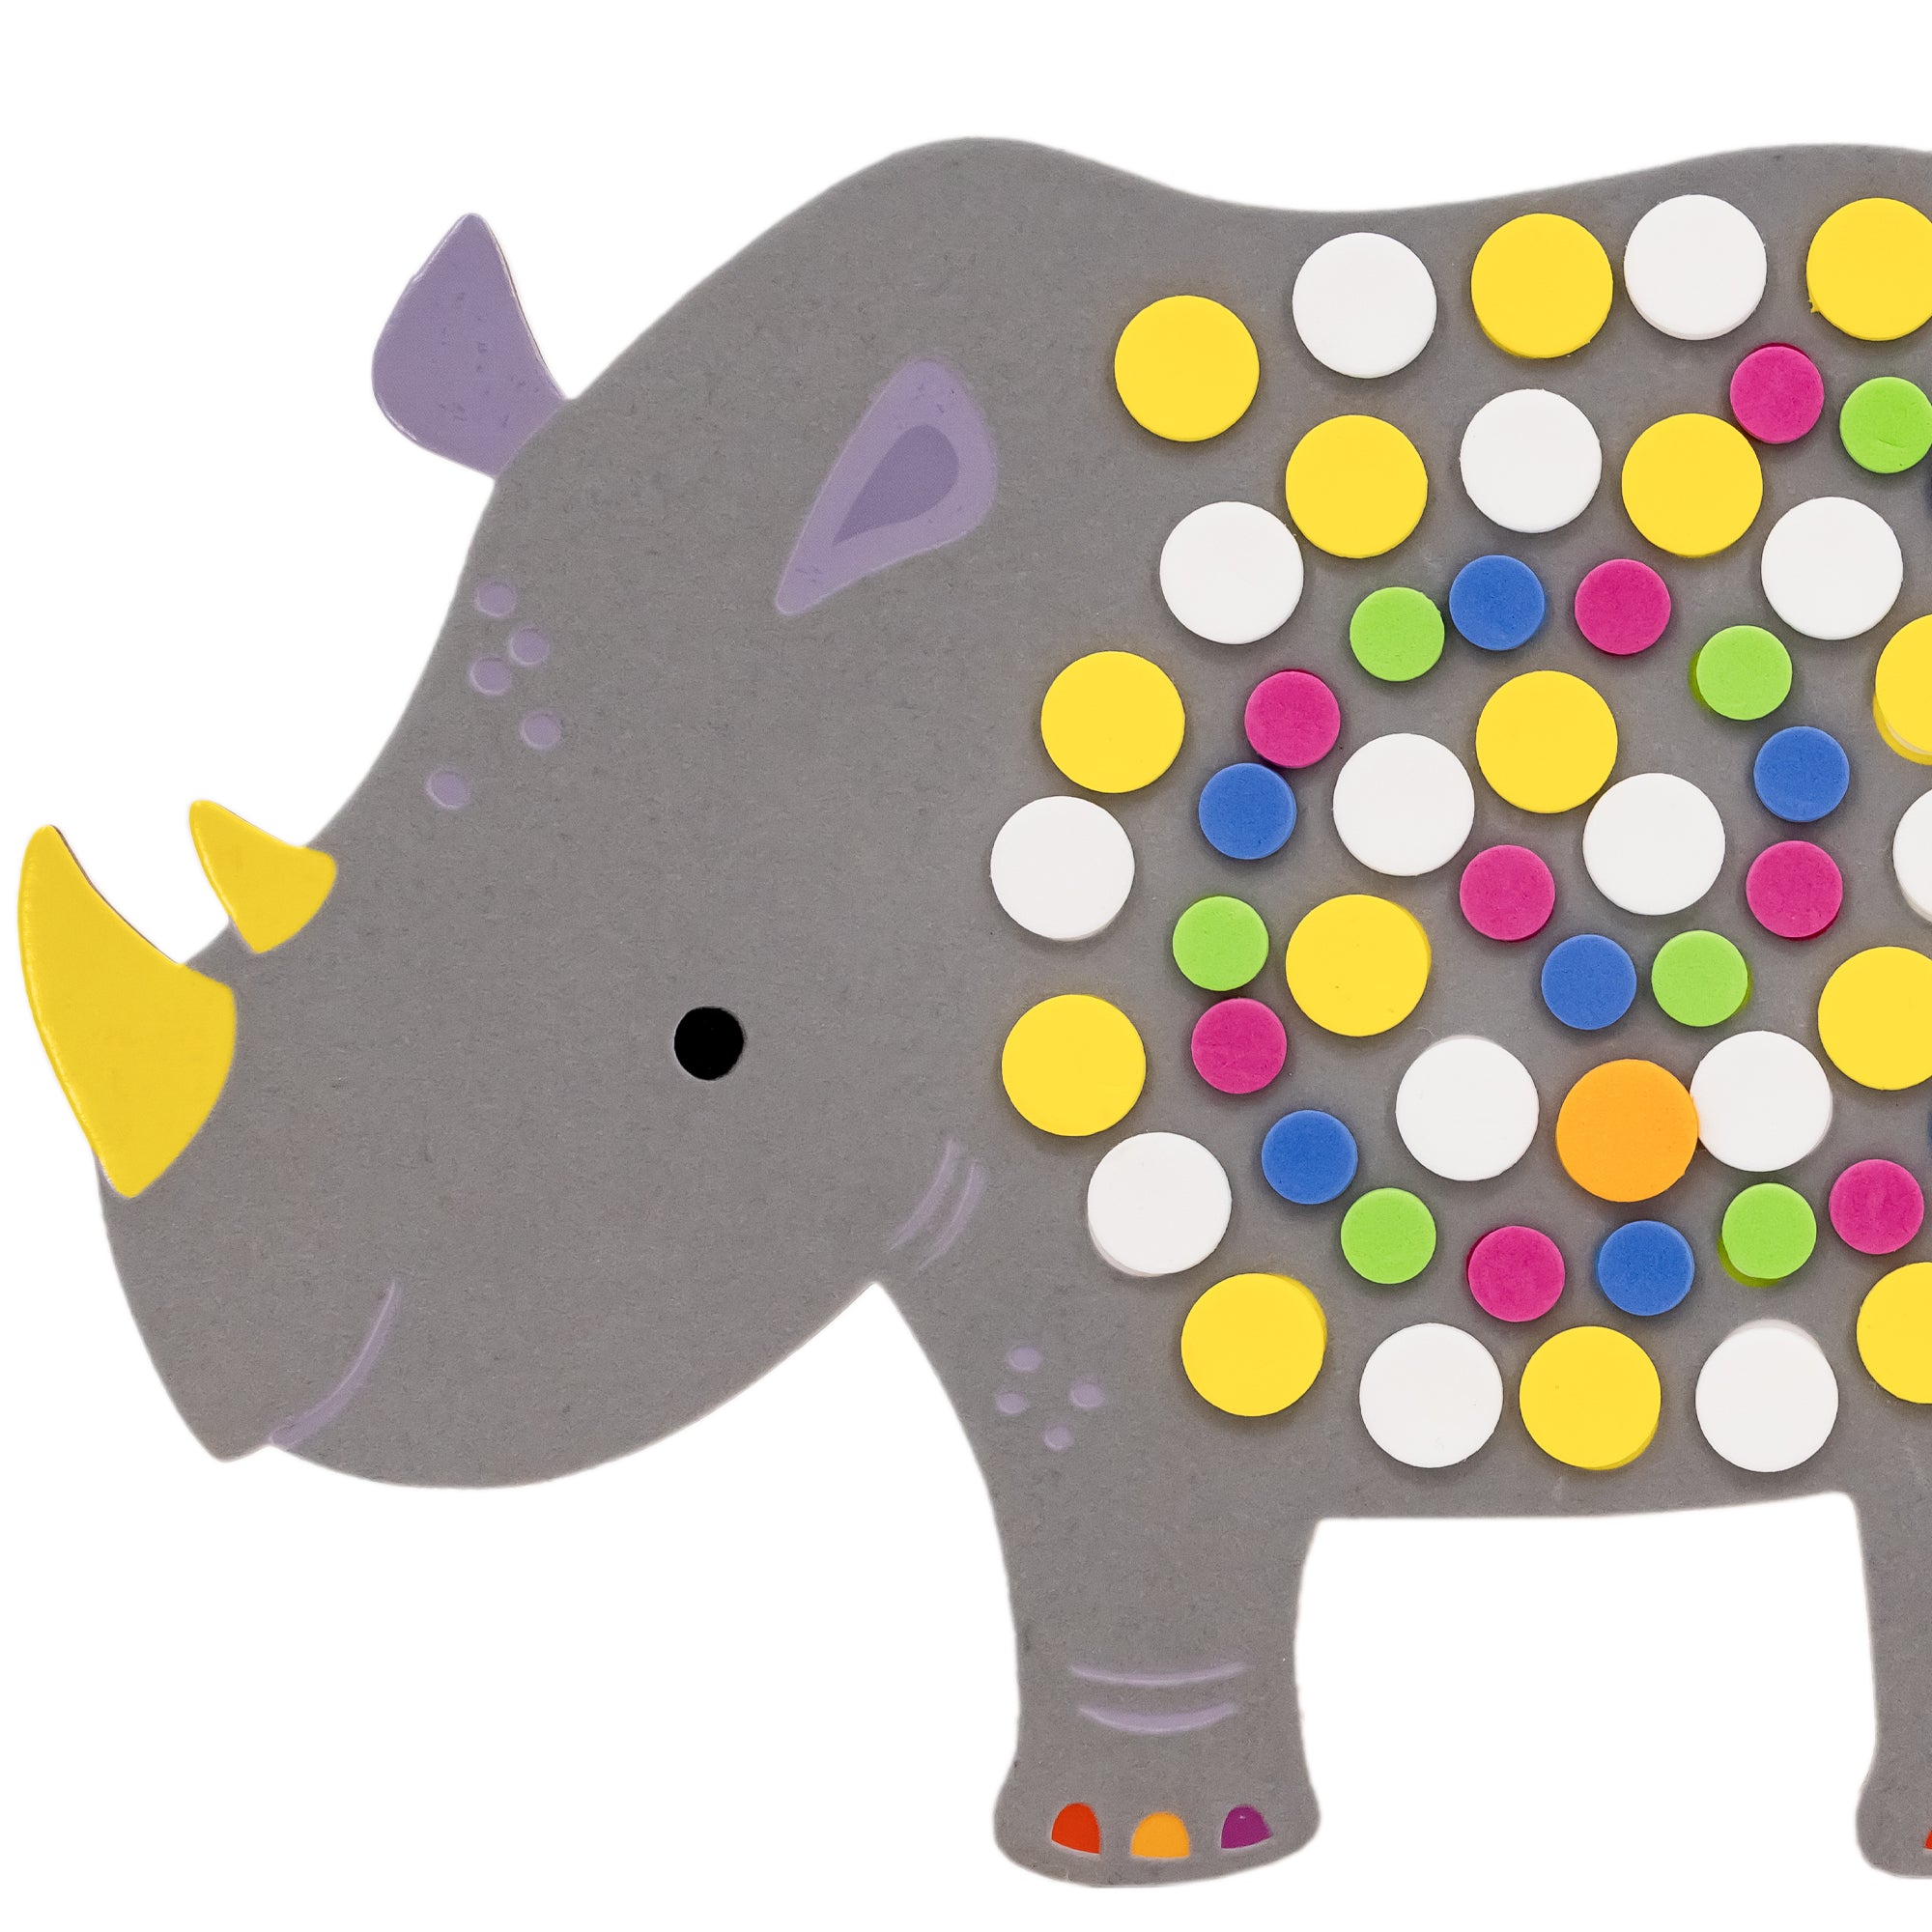 A close up of the Djeco Soft Jungle Mosaics rhino project, assembled. The gray rhino is smiling. The main portion is covered in foam dot stickers of various colors and sizes. The larger dots are white and yellow and the smaller dots are green, pink, and blue.